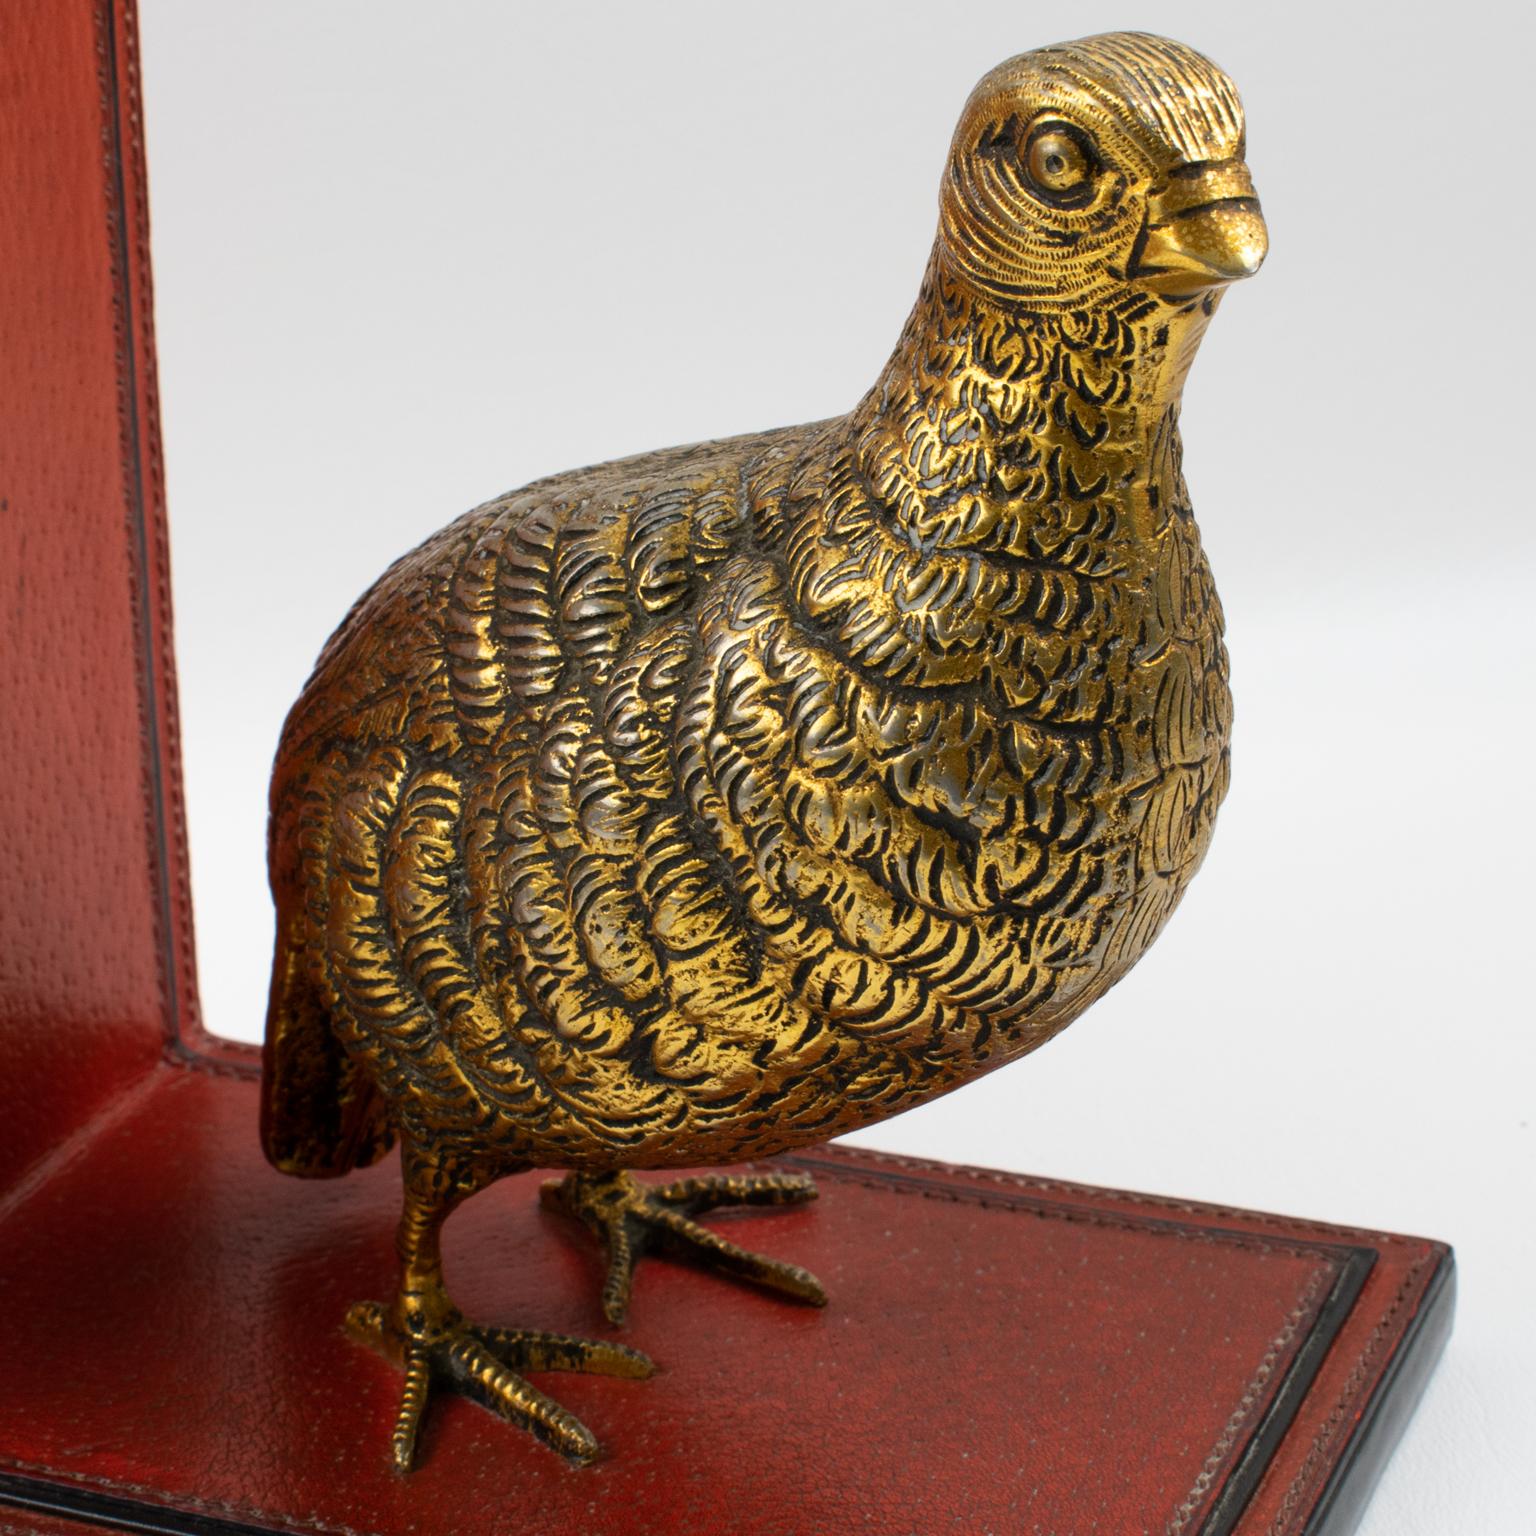 Gucci Italy Hand-Stitched Red Leather Bookends with Gilt Metal Partridges, 1970s For Sale 1